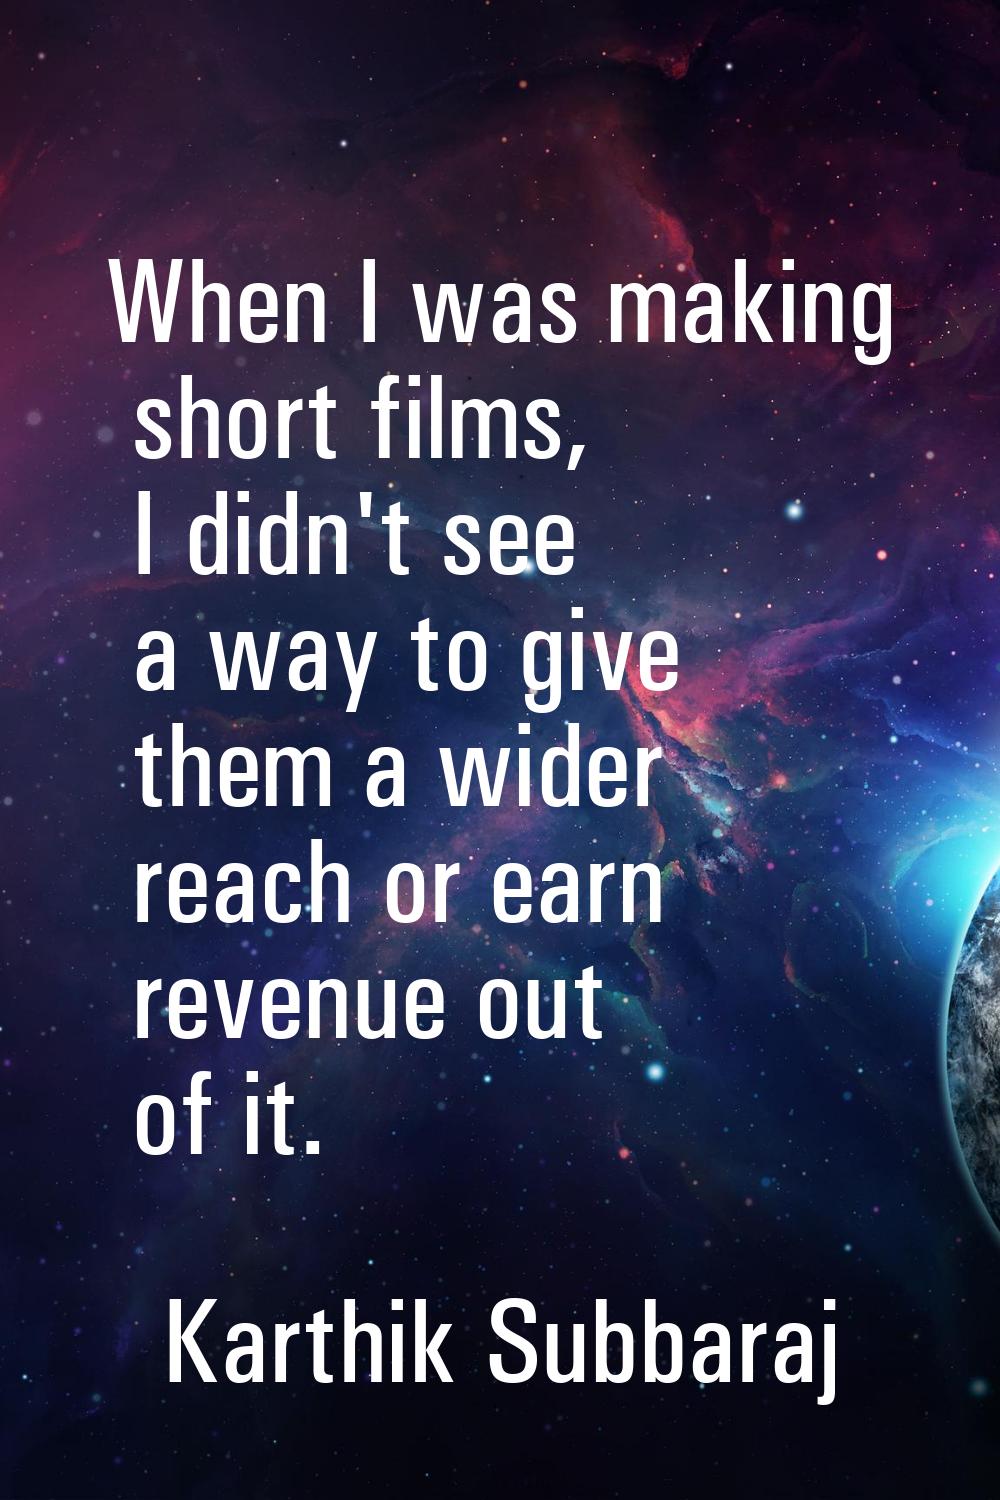 When I was making short films, I didn't see a way to give them a wider reach or earn revenue out of